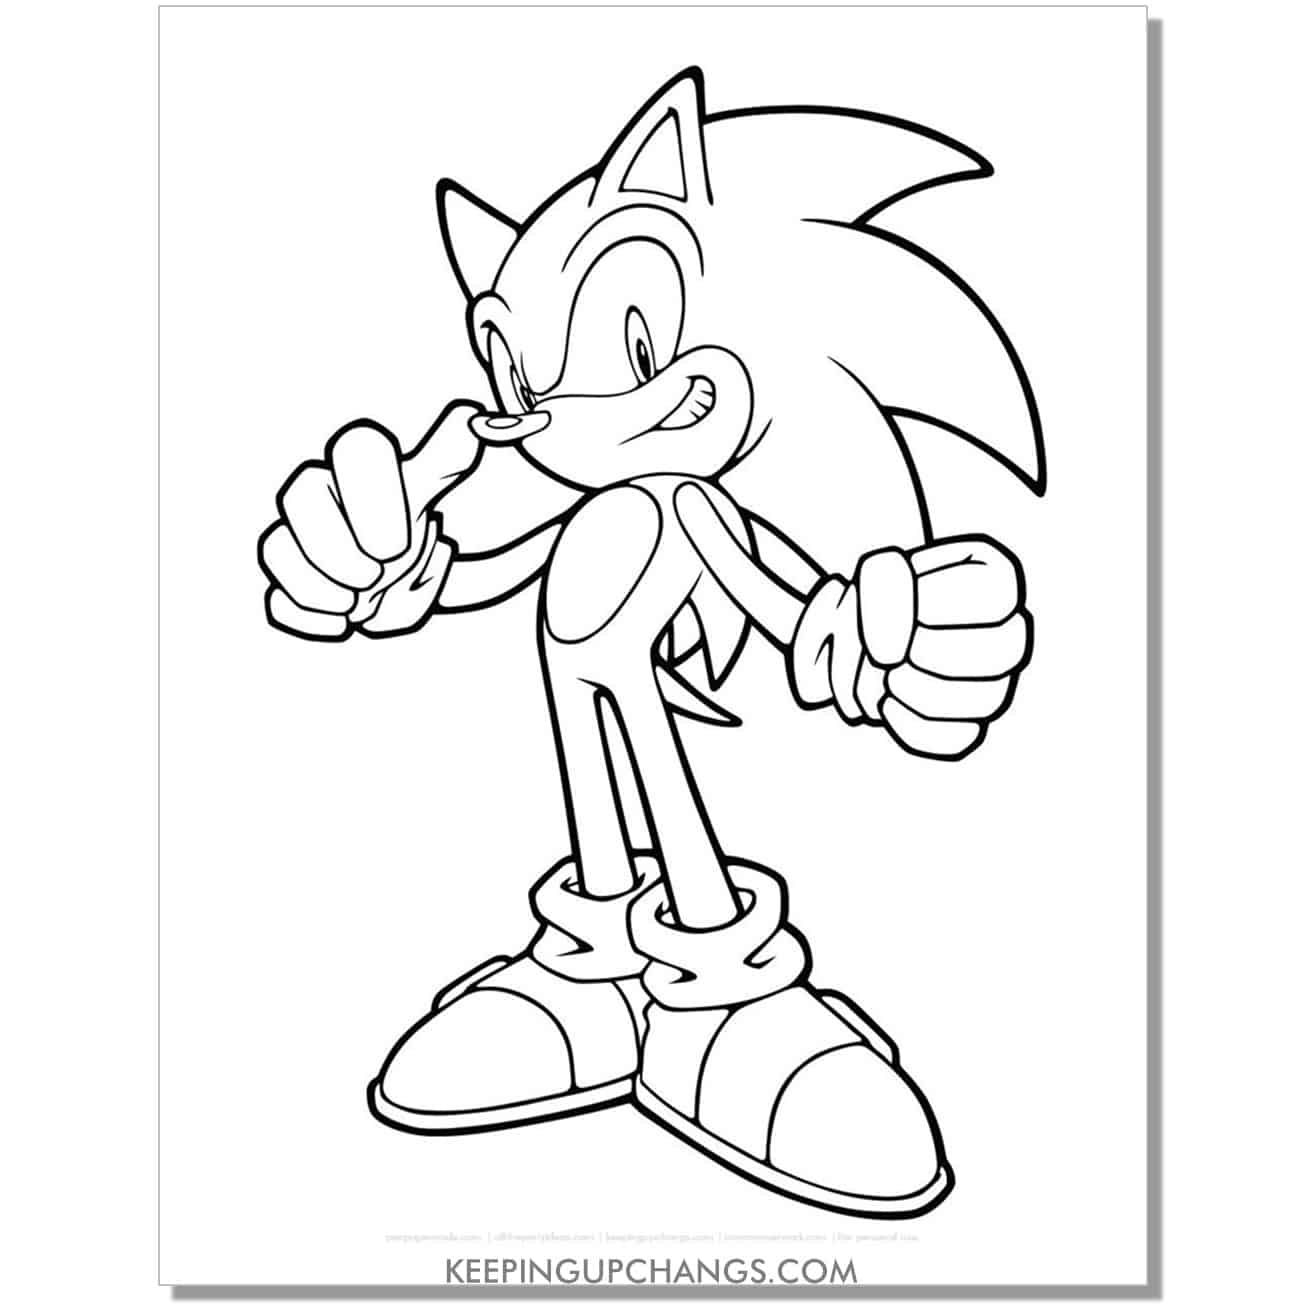 sonic pointing thumb at head coloring page.